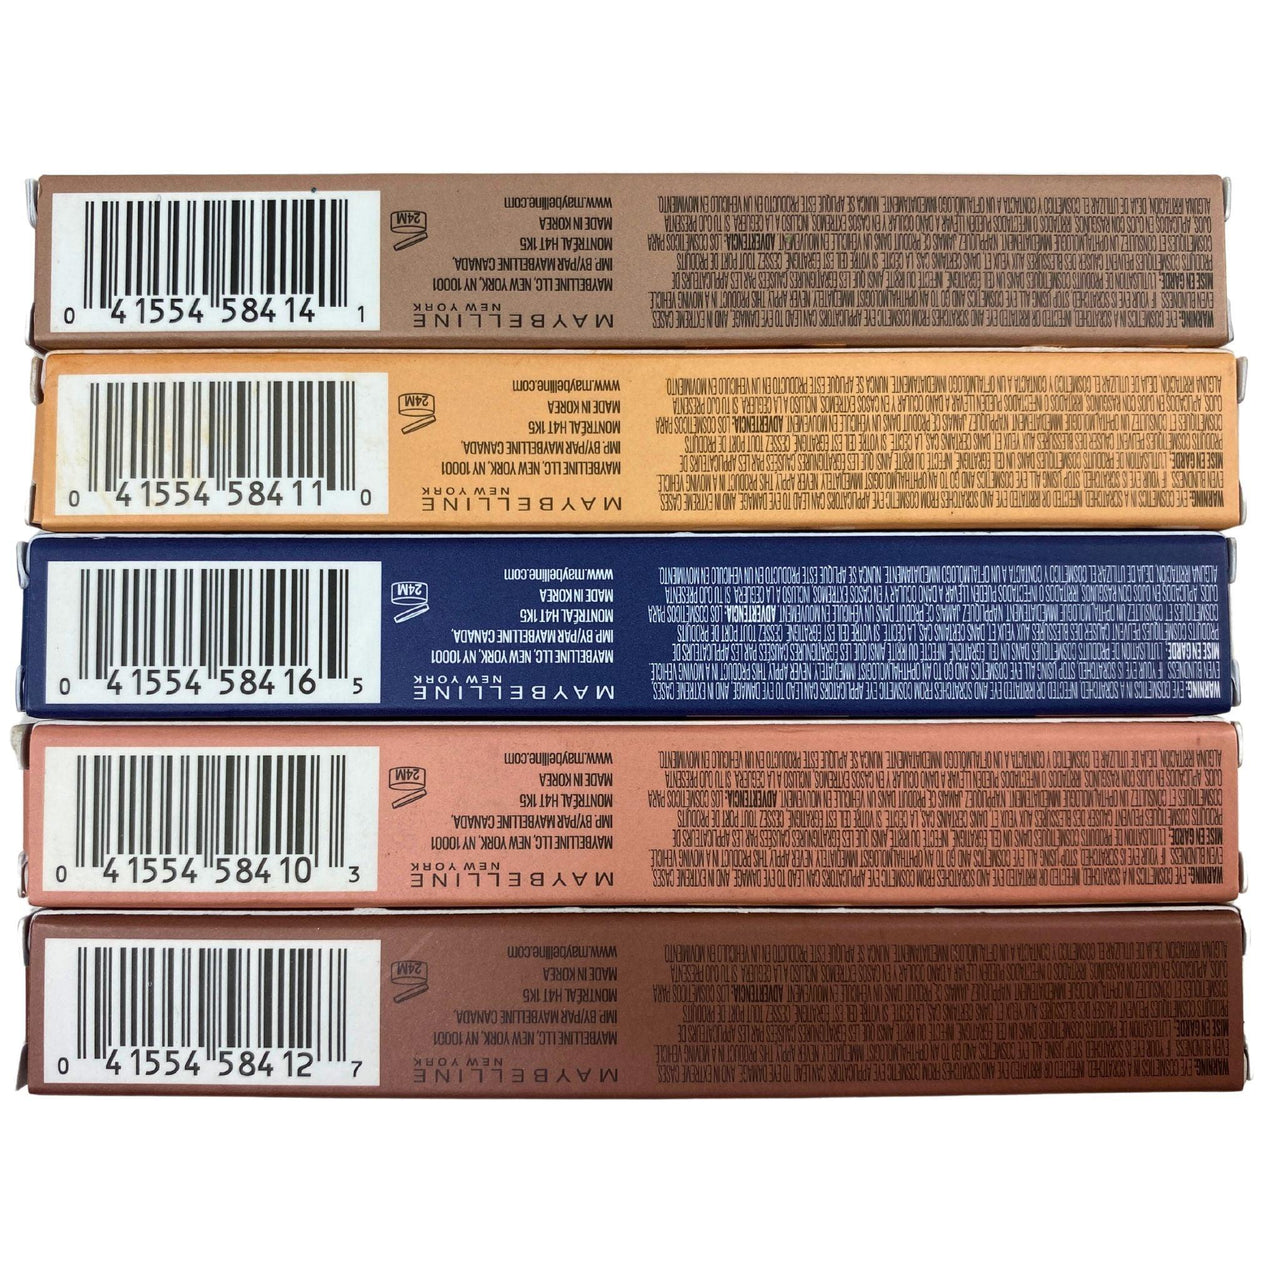 Maybelline Colorstrike Cream to Powder Eye Shadow Pen Assorted Mix 0.012OZ (50 Pcs Lot) - Discount Wholesalers Inc